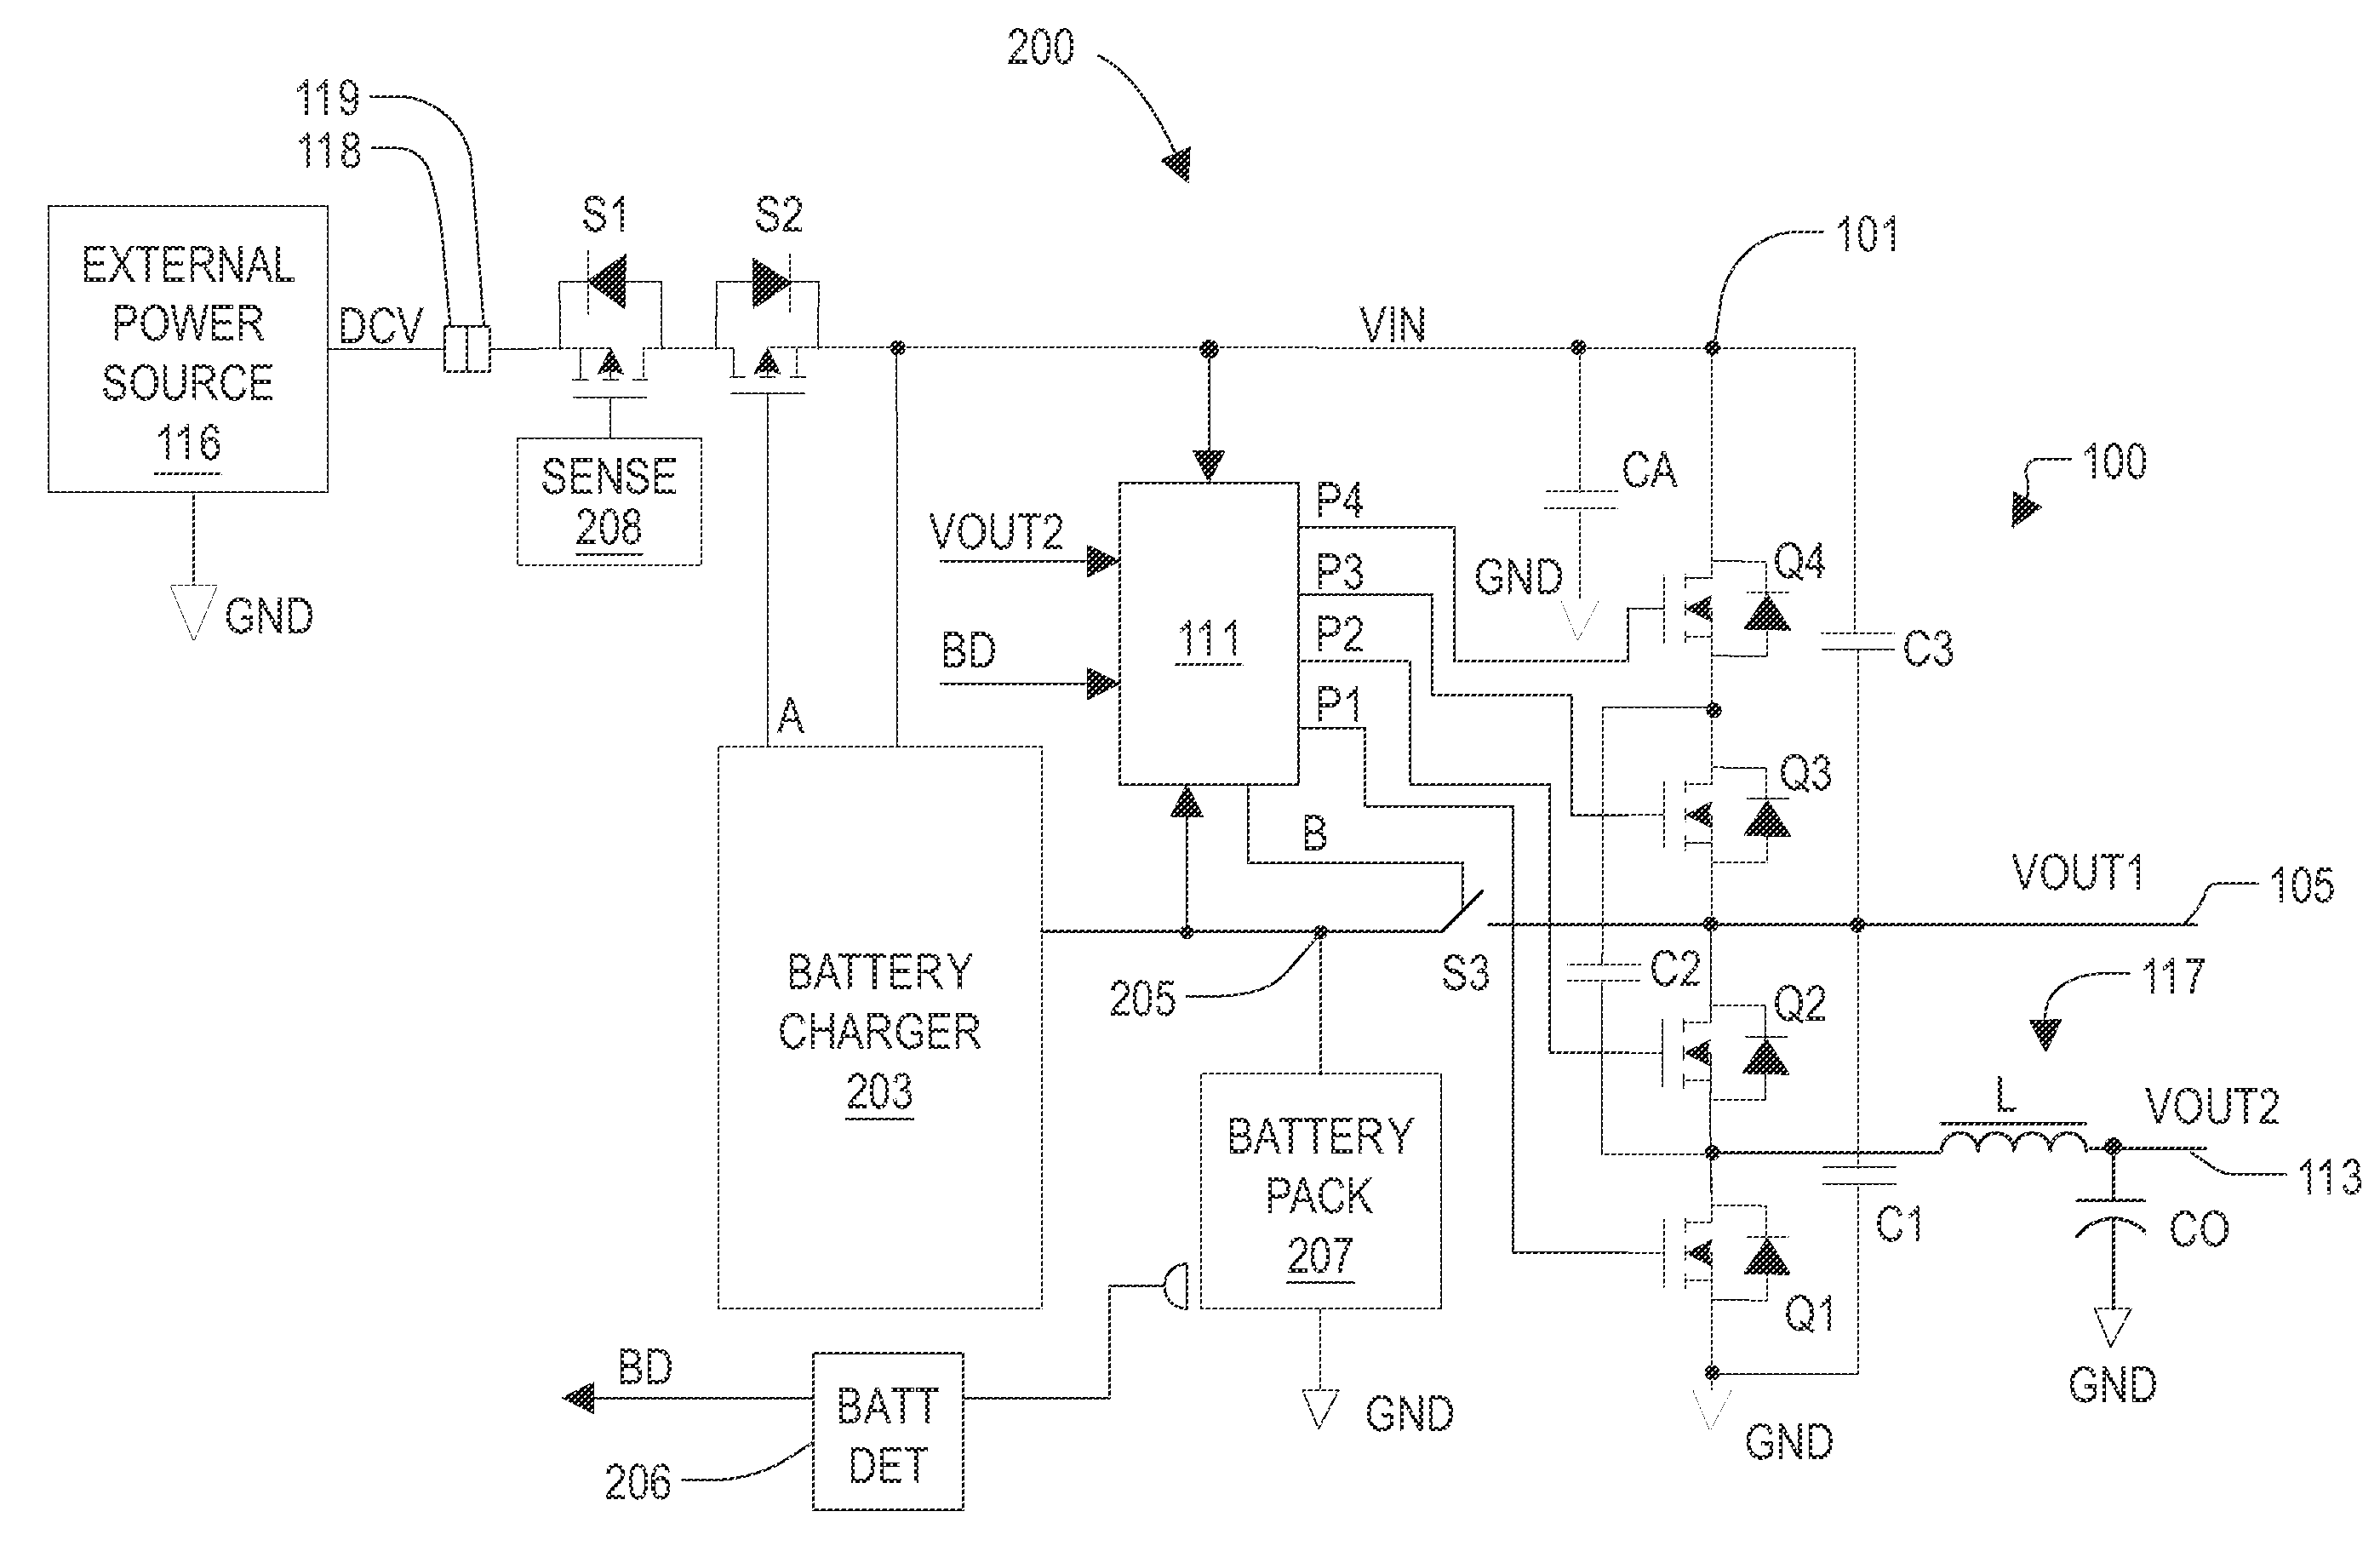 Voltage converter with combined buck converter and capacitive voltage divider